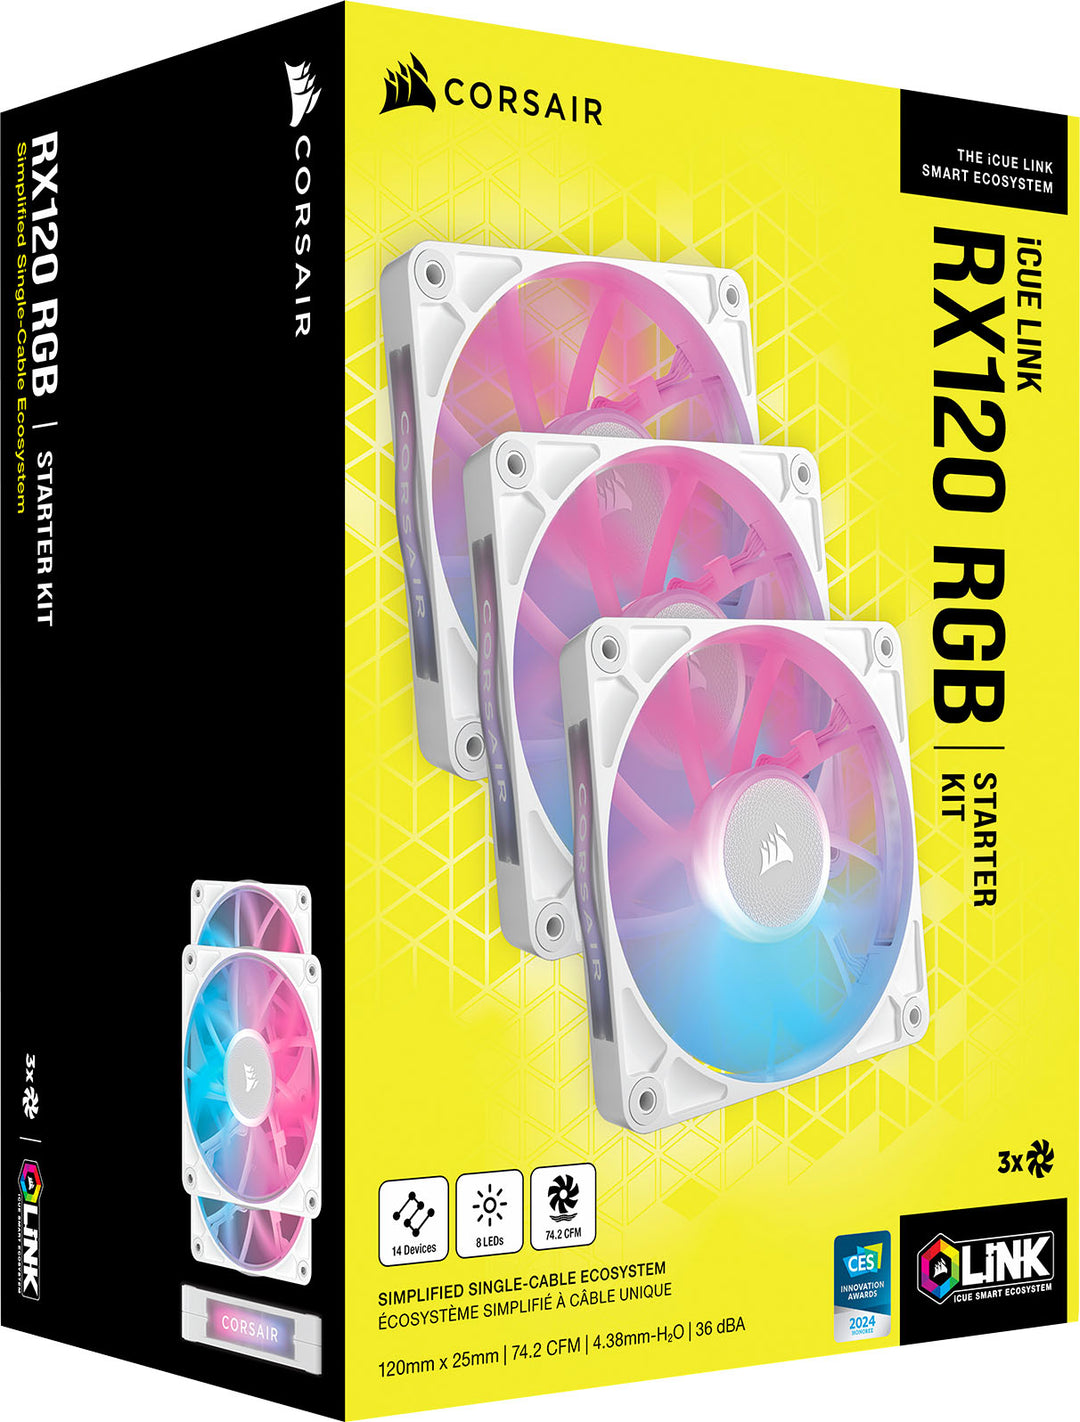 CORSAIR - iCUE LINK RX120 RGB 120mm PWM Computer Case Fan Starter Kit (3-pack) - White_4